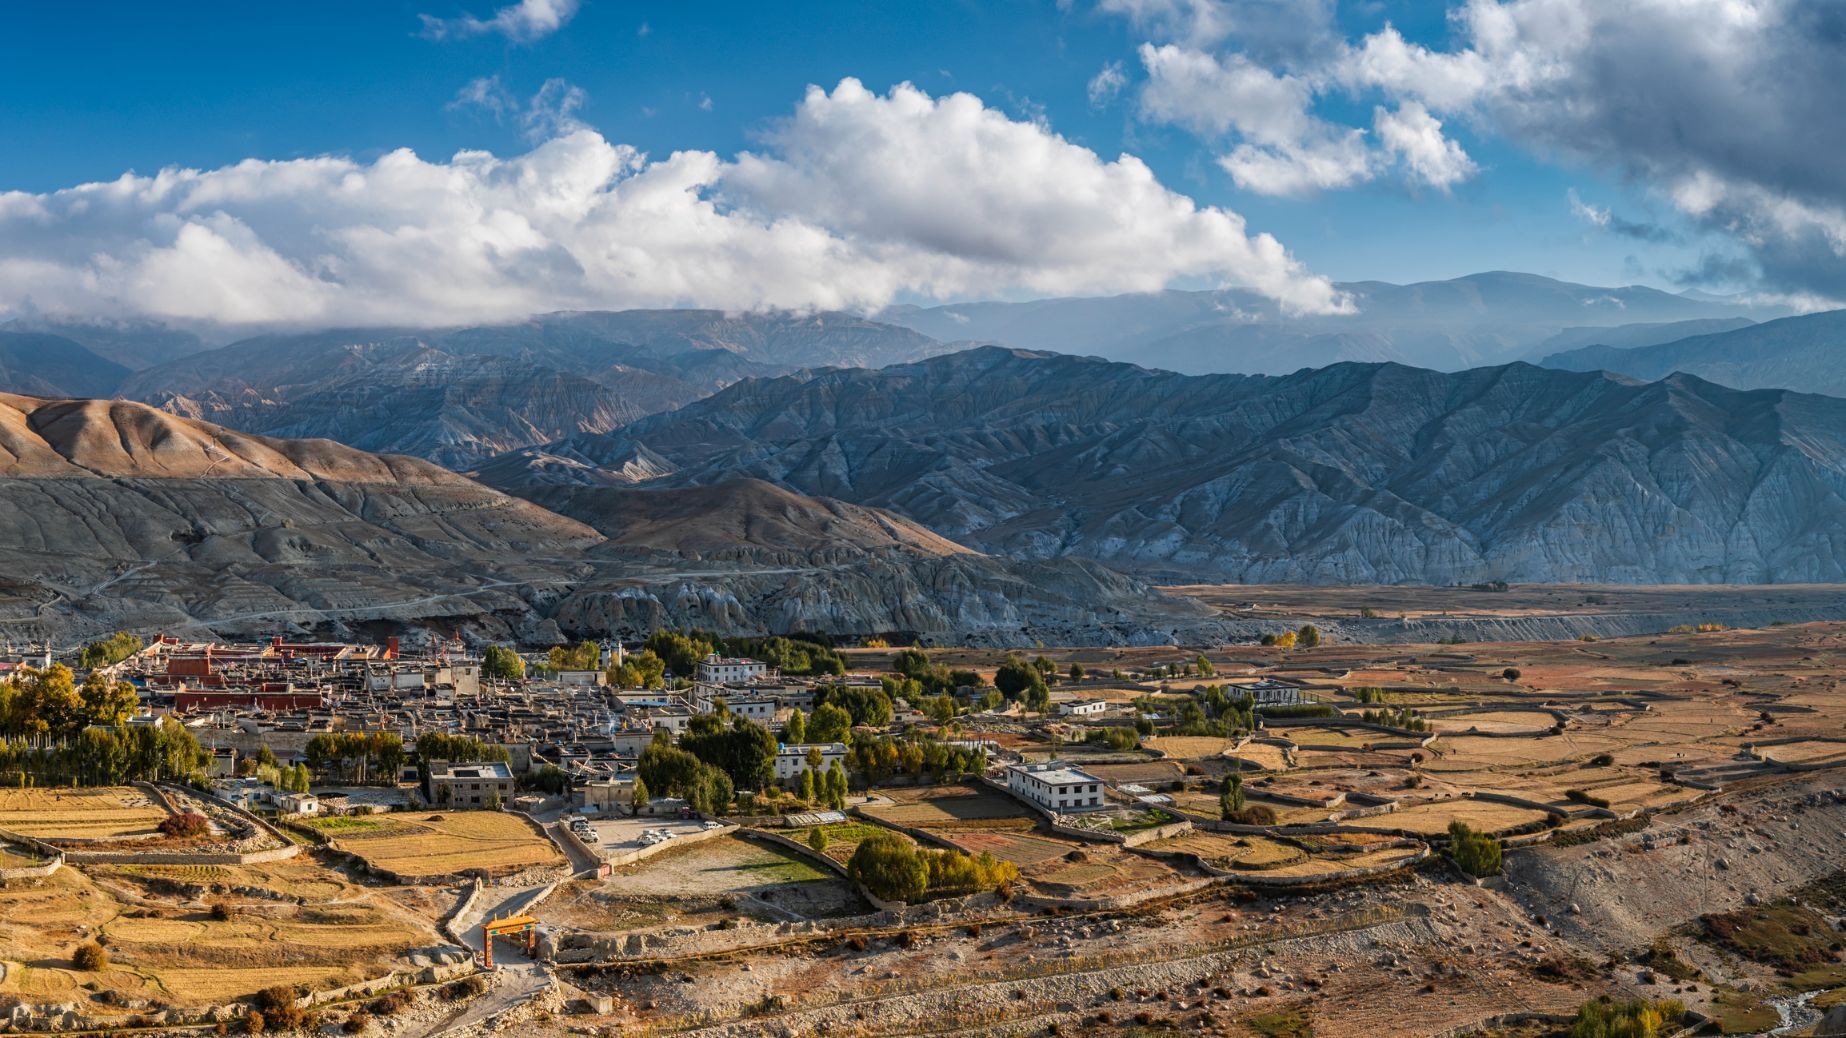 A panoramic view of Lo Manthang, the capital of the Mustang region in the Nepal Himalaya. 